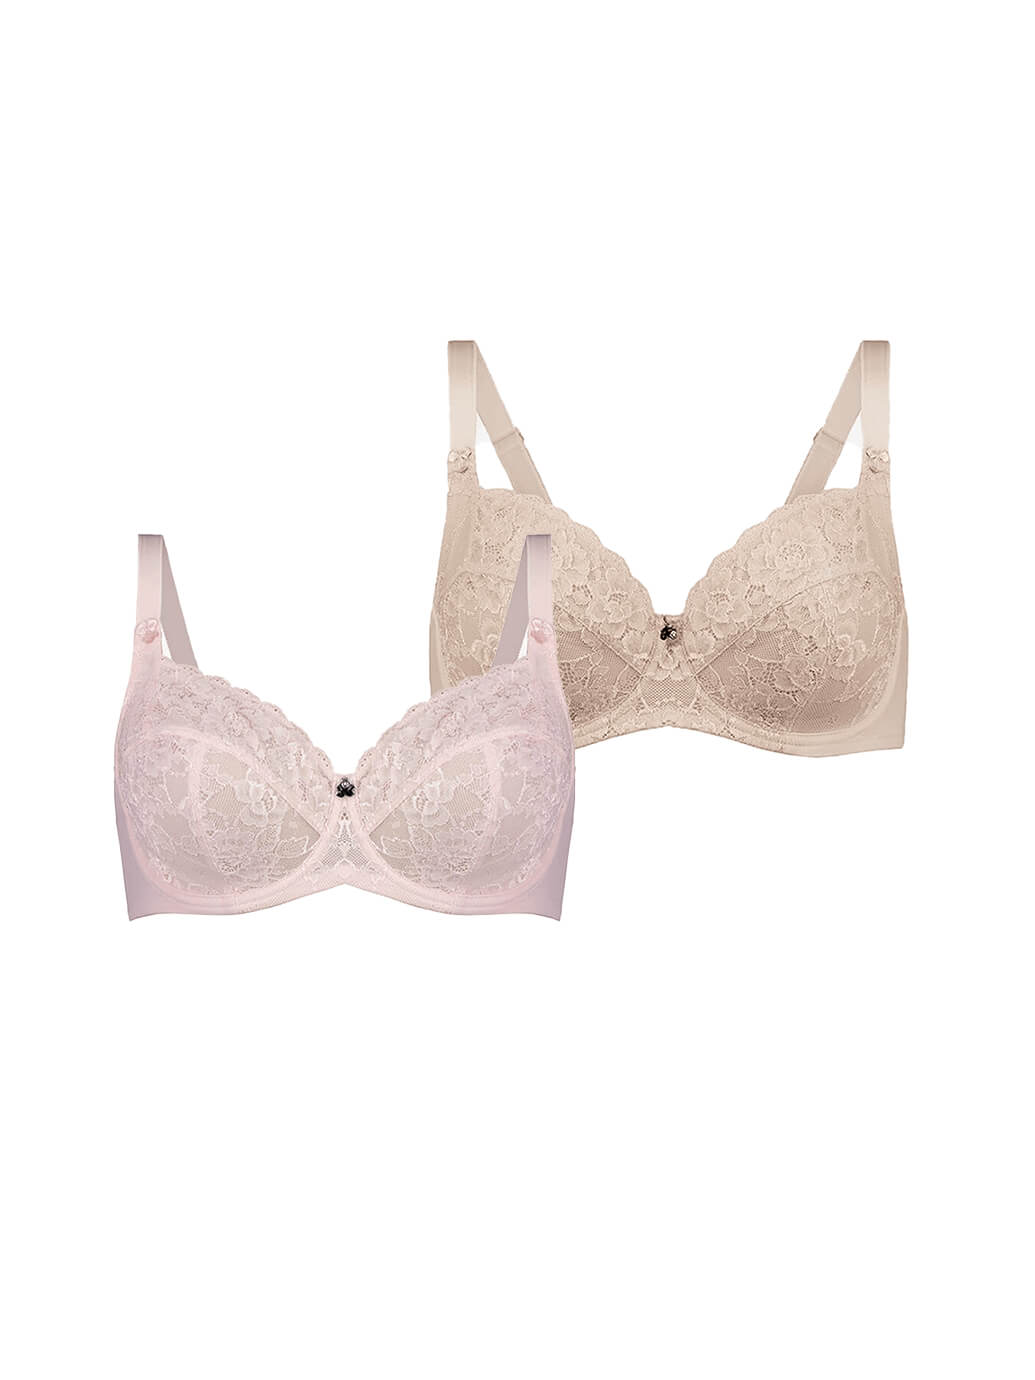 Dahlia Lace Bras (2 Pack) - Almond and Pink Smoke